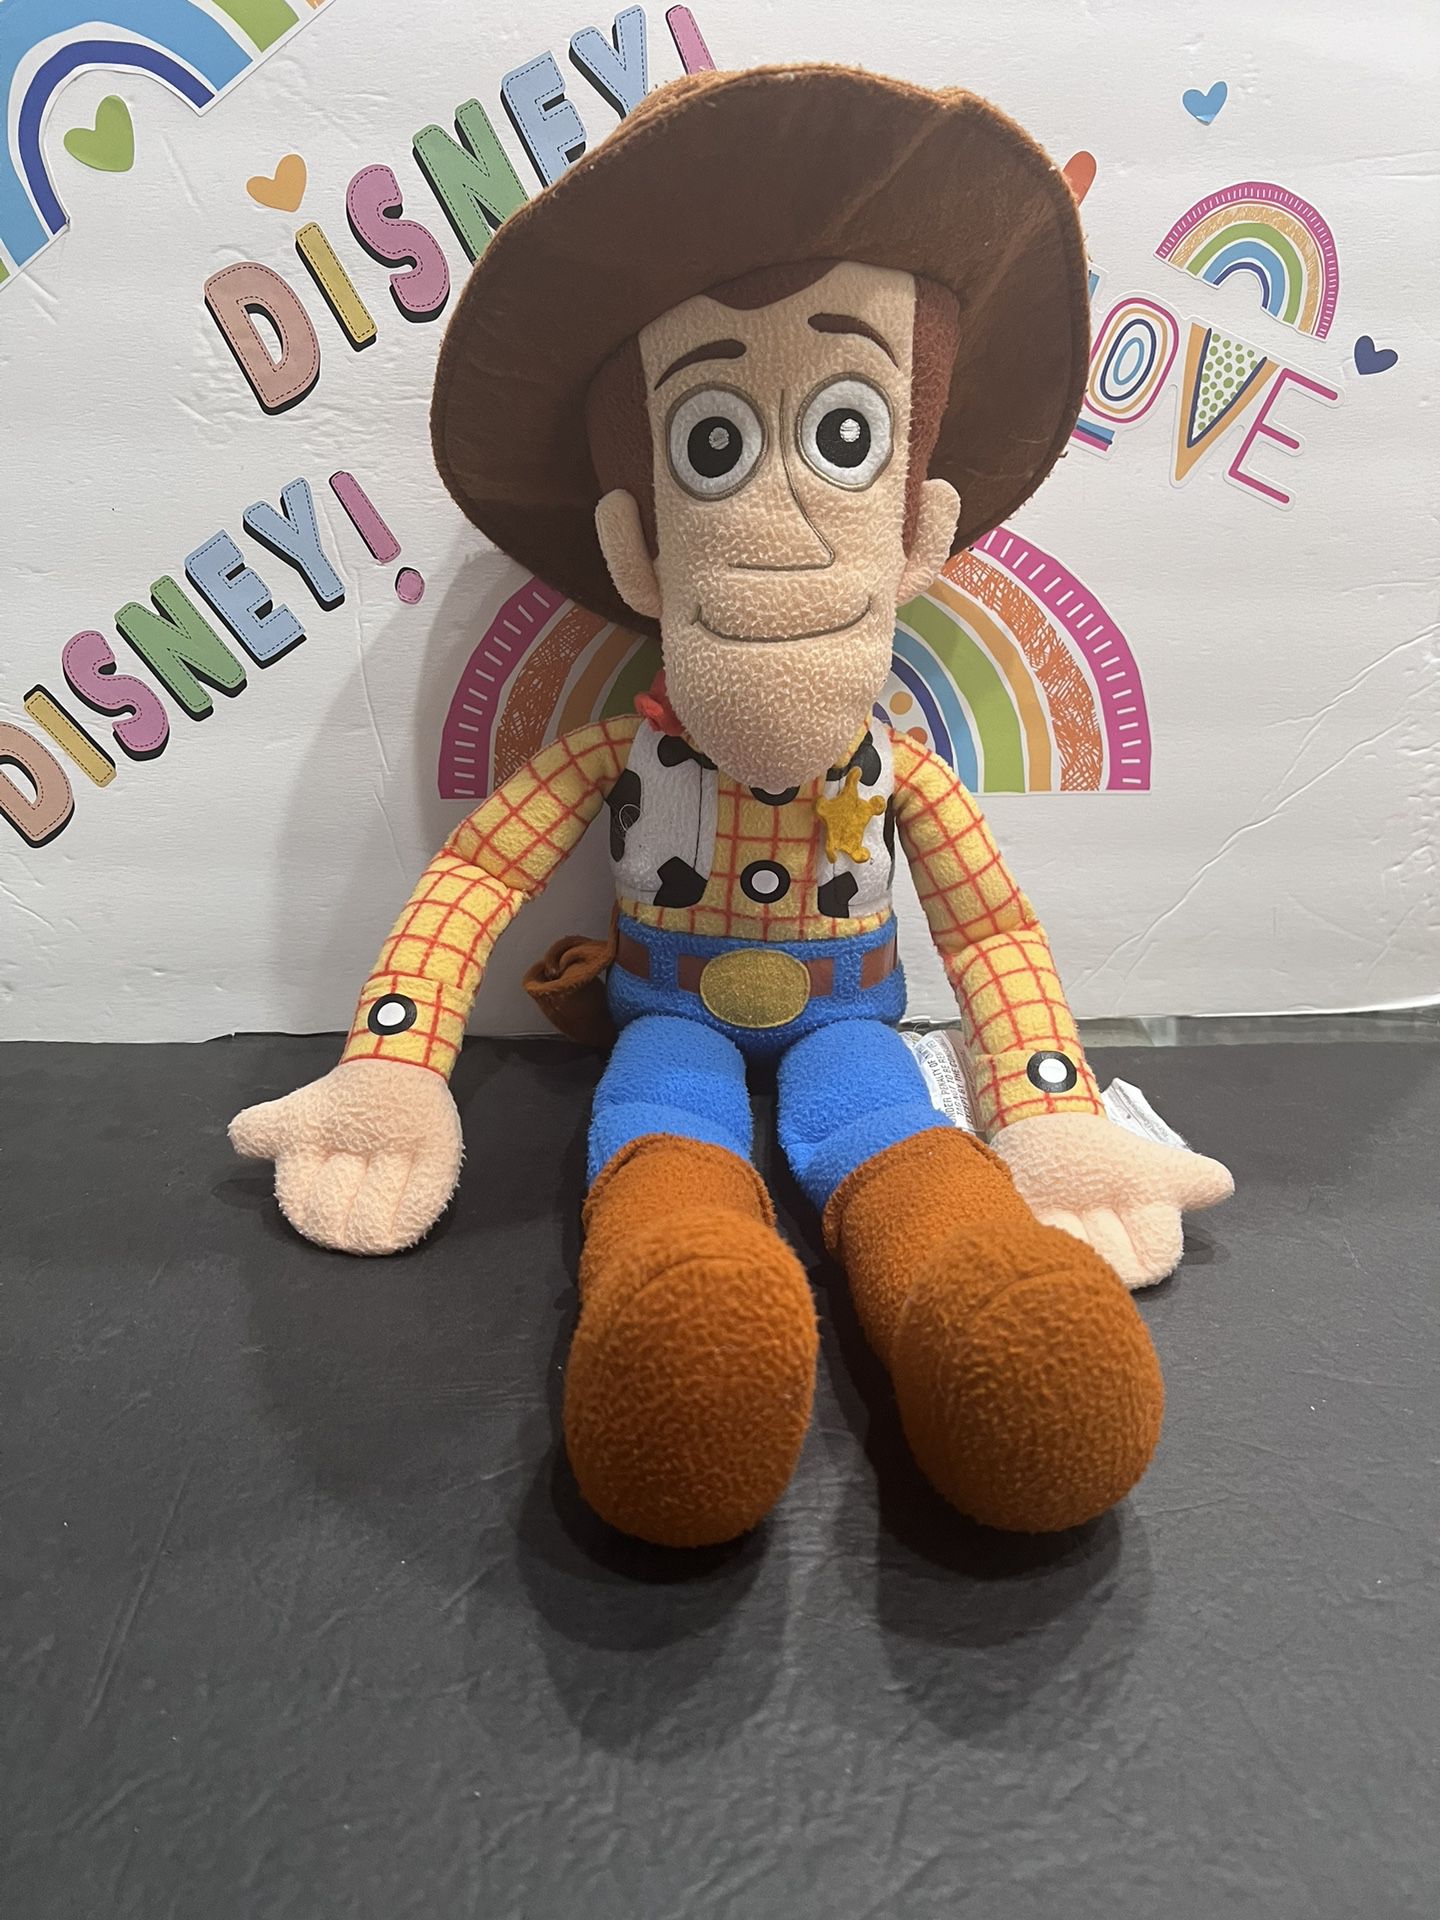 DISNEY TOY STORY WOODY GIANT 28 INCH TALL SOFT  PLUSH!  SUPER AWESOME!